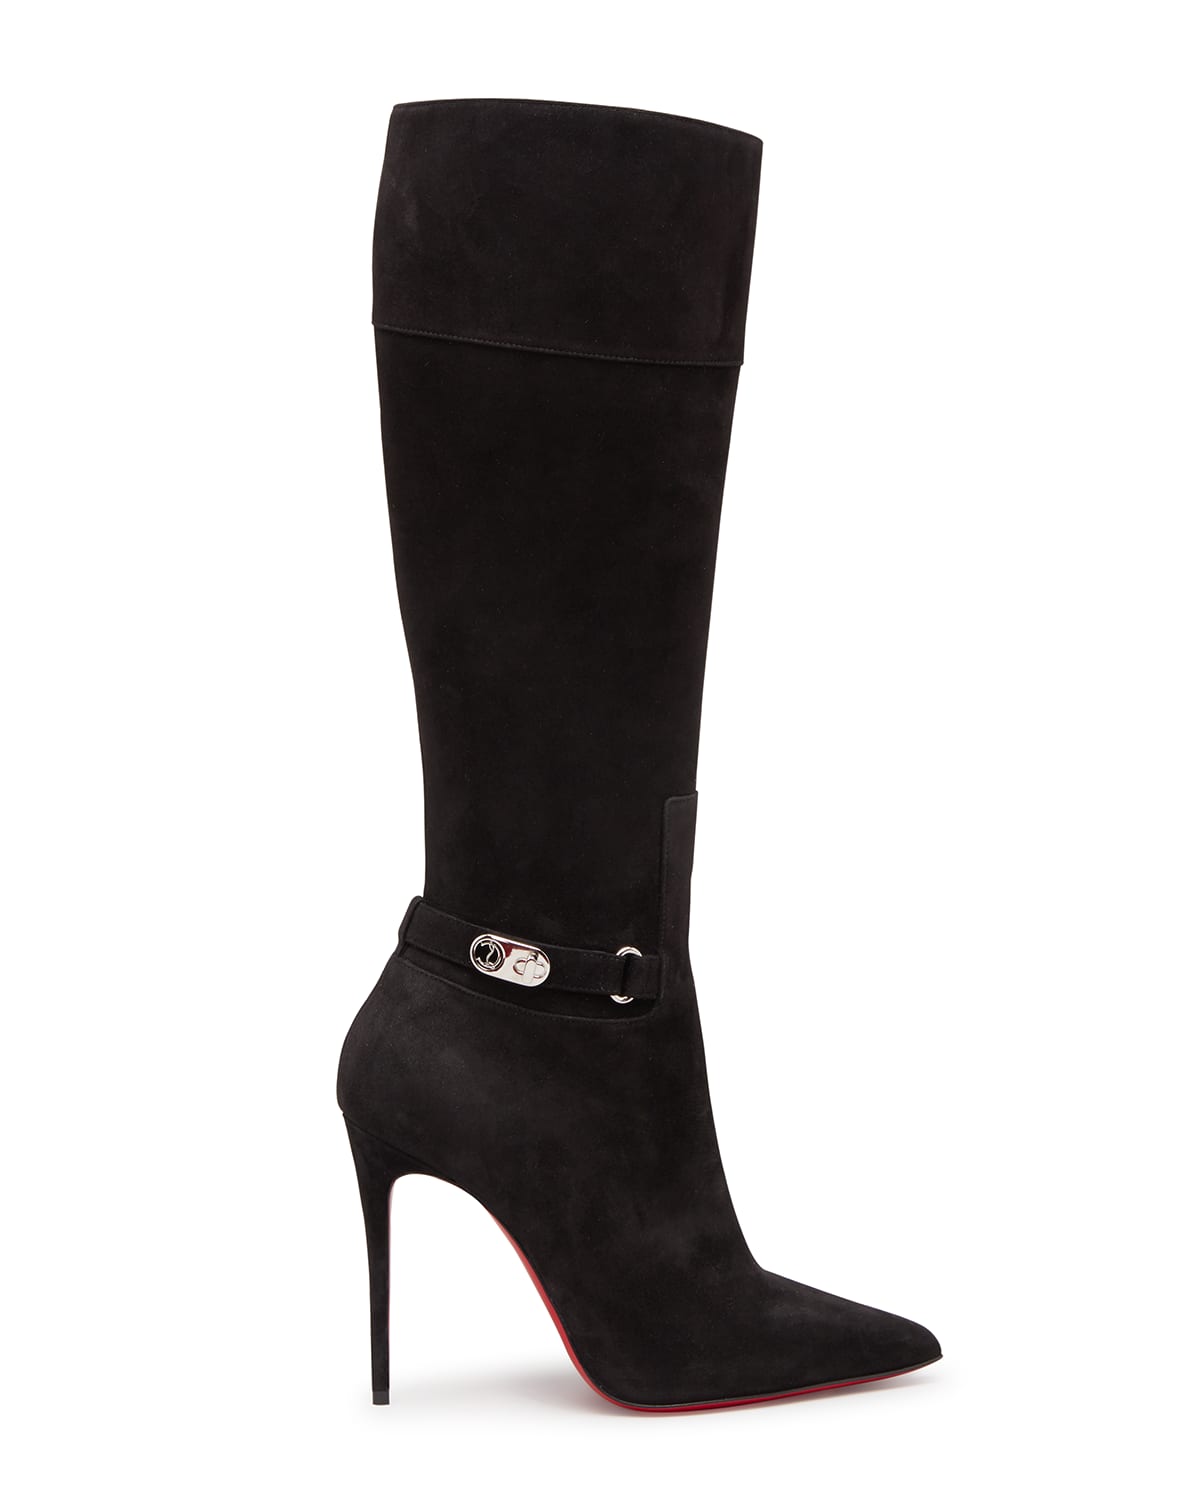 Christian Louboutin Lock Kate Suede Tall Red Sole Boots